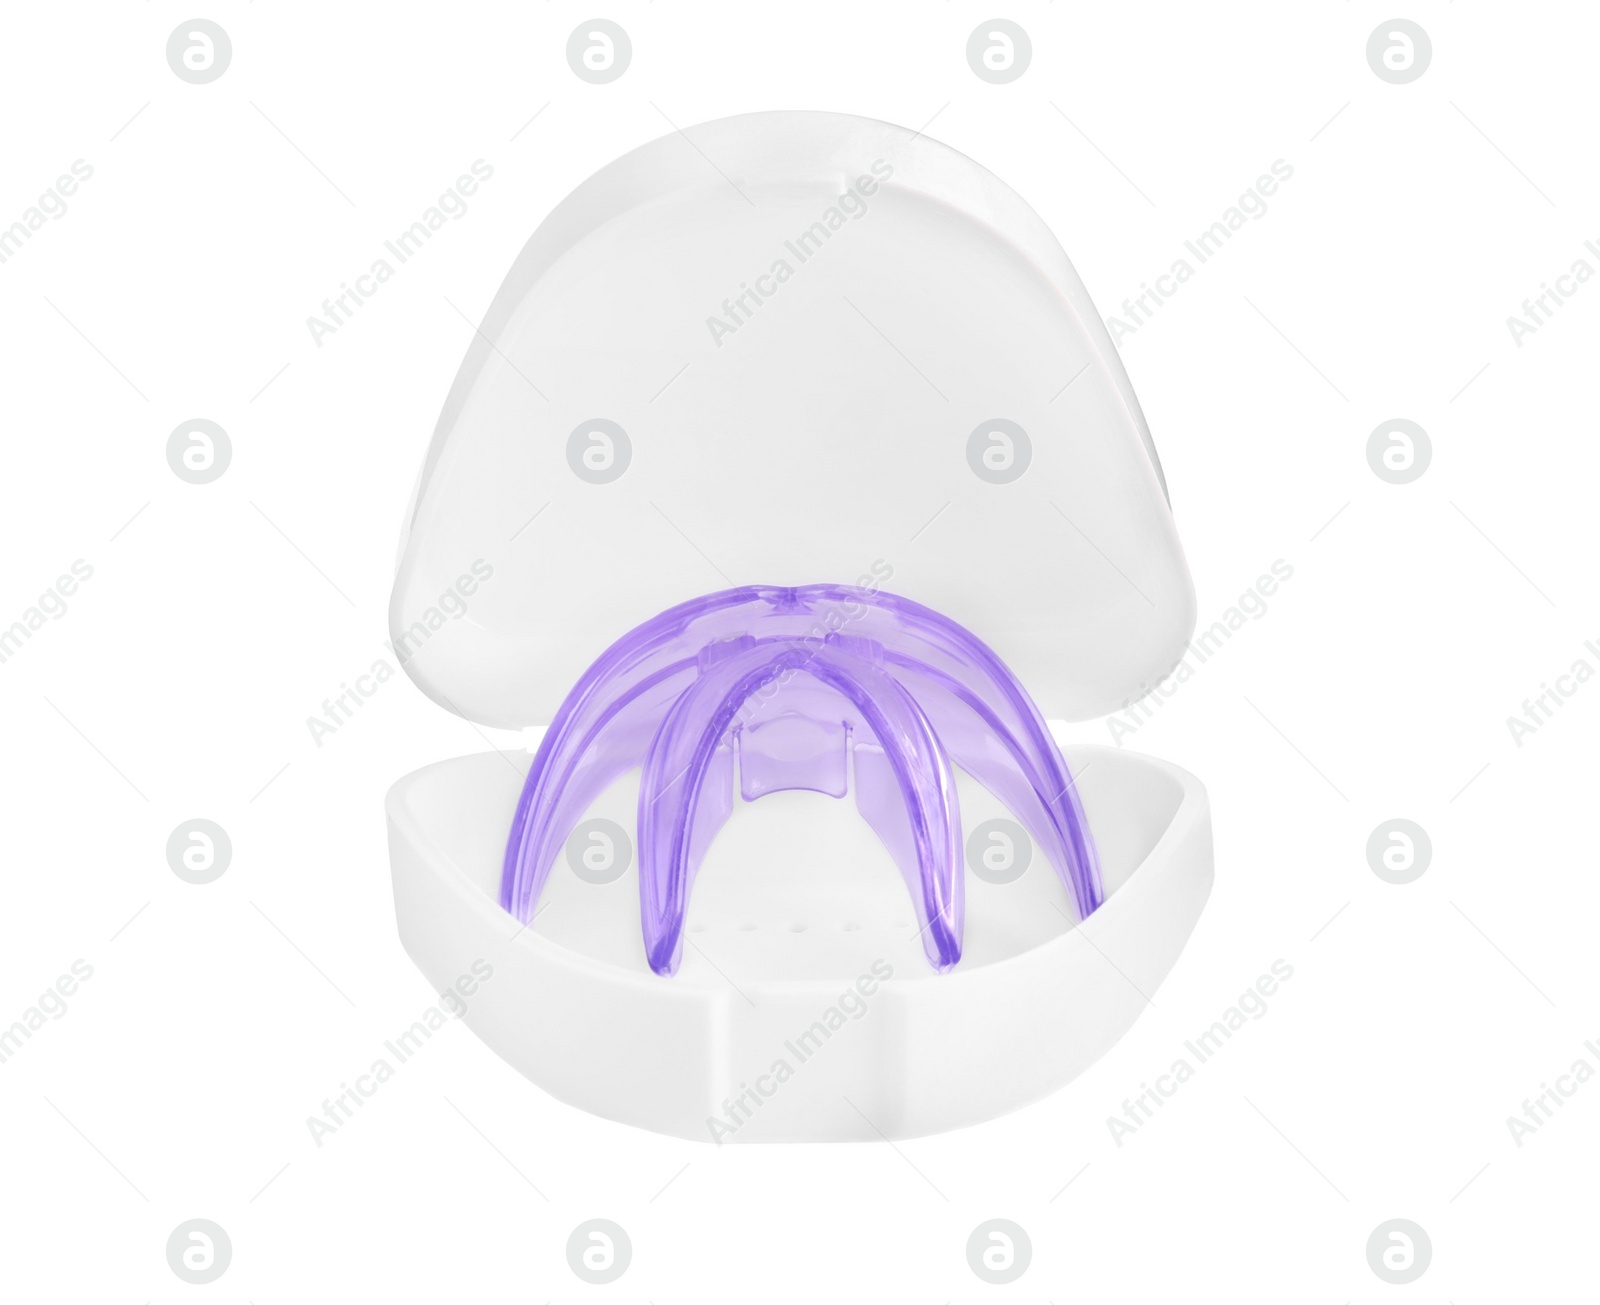 Photo of Container with transparent dental mouth guard isolated on white. Bite correction